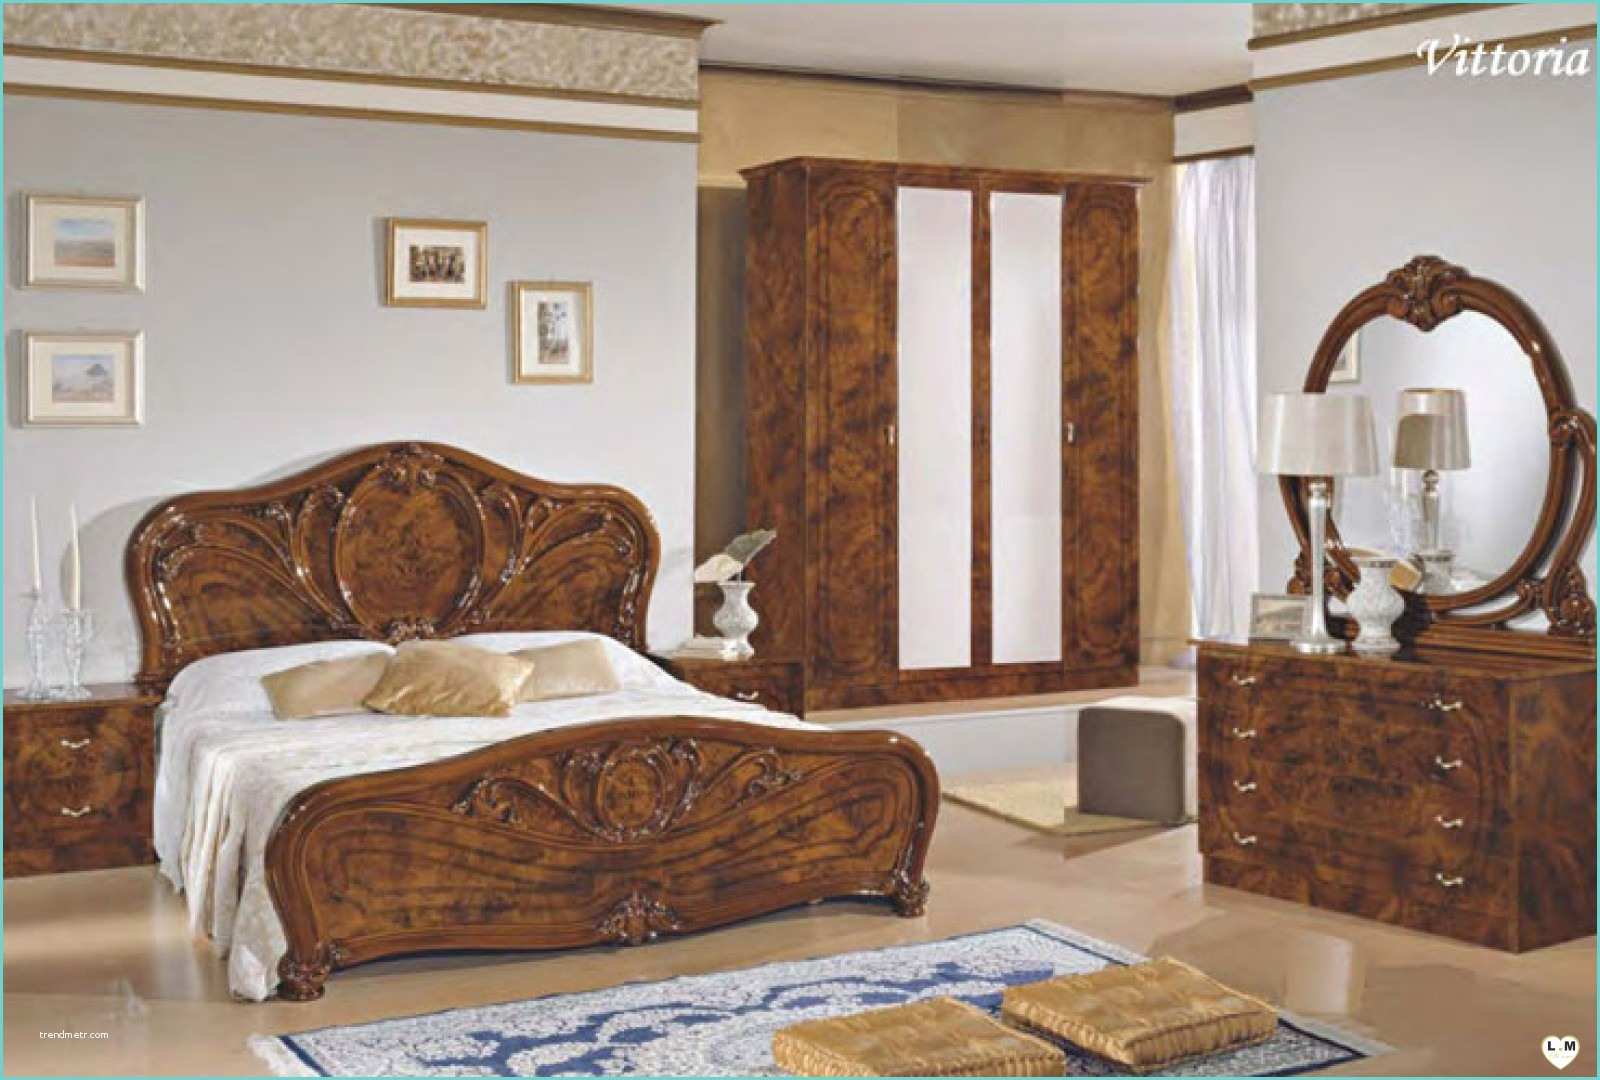 Chambre A Coucher Italienne Pas Cher Charming Chambre A Coucher Italienne Pas Cher 4 Best